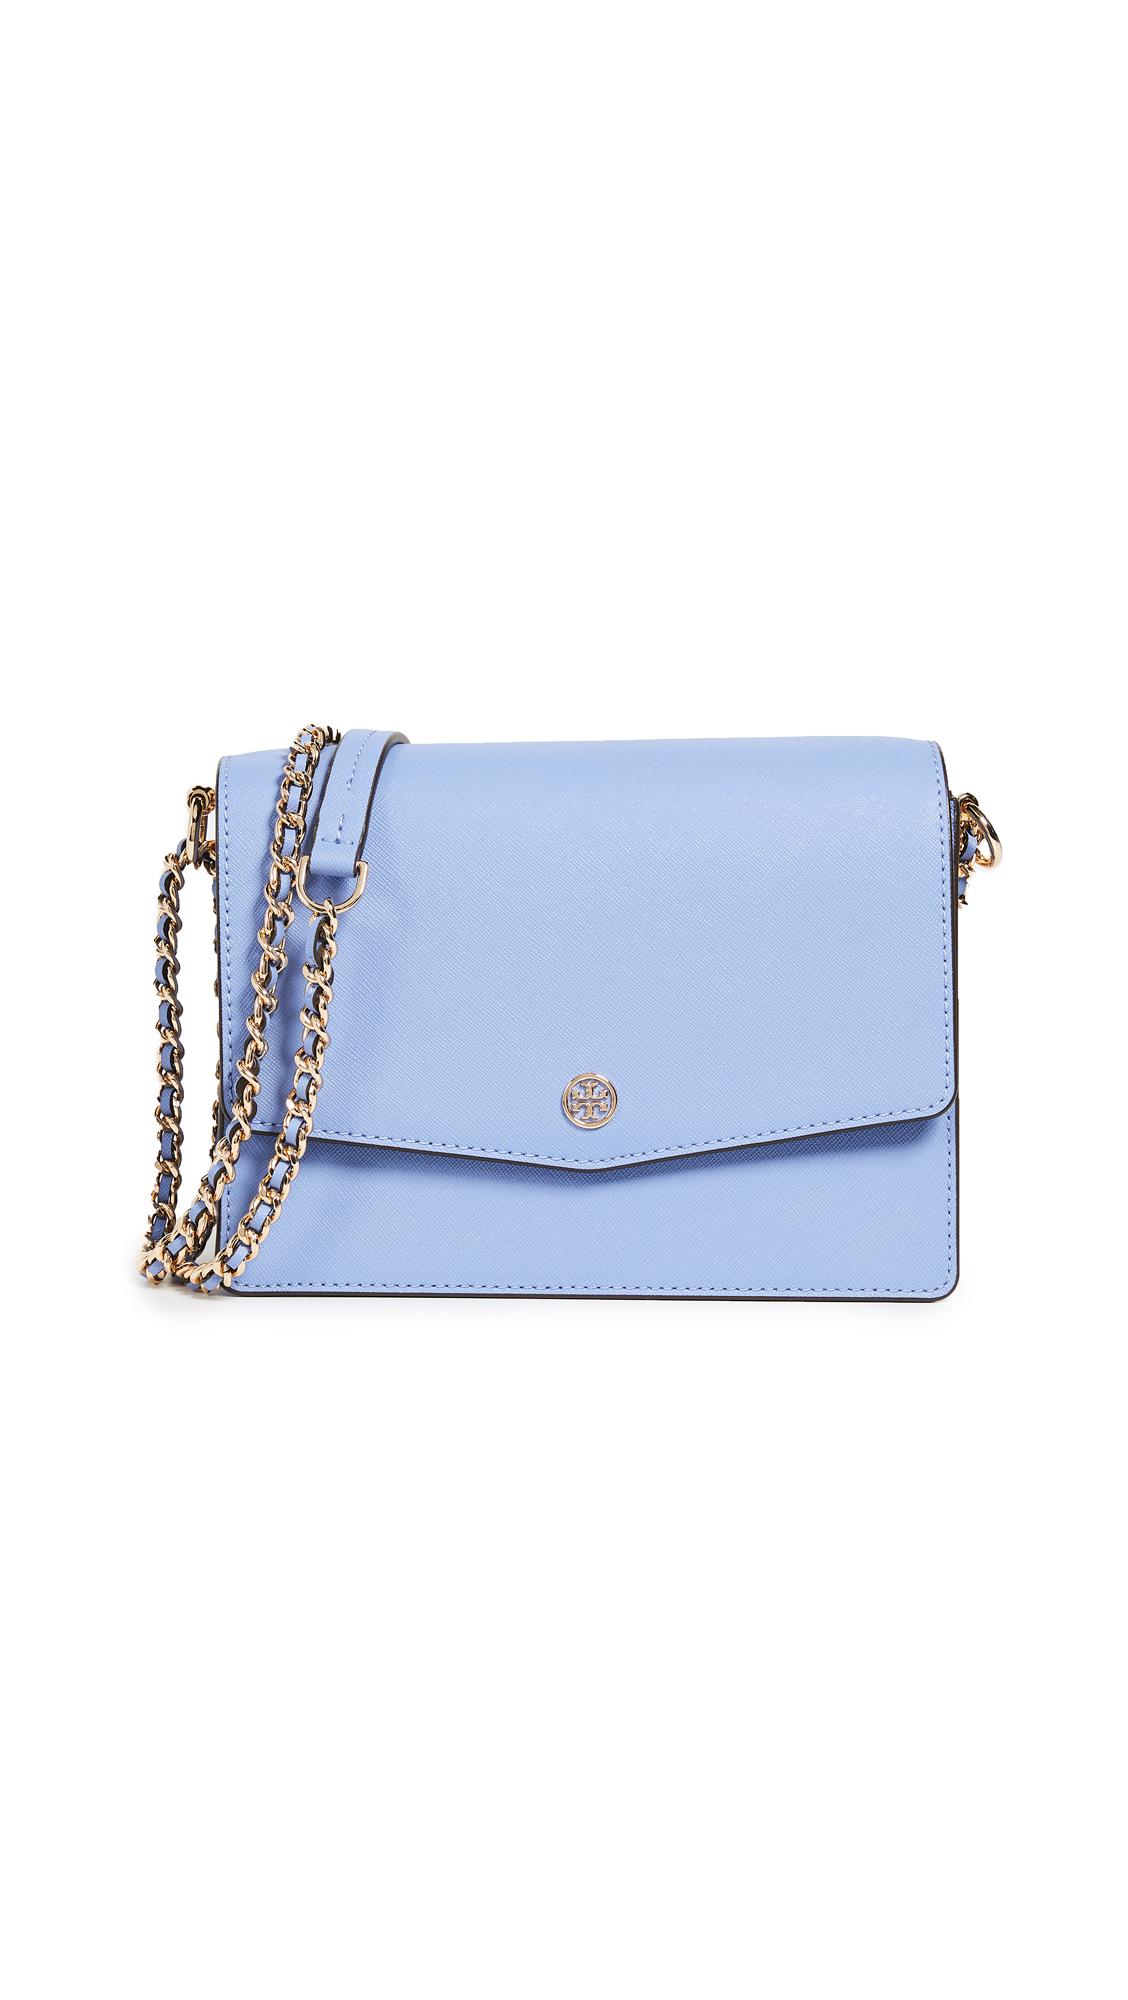 Tory Burch Robinson Convertible Shoulder Bag in Blue | Lyst